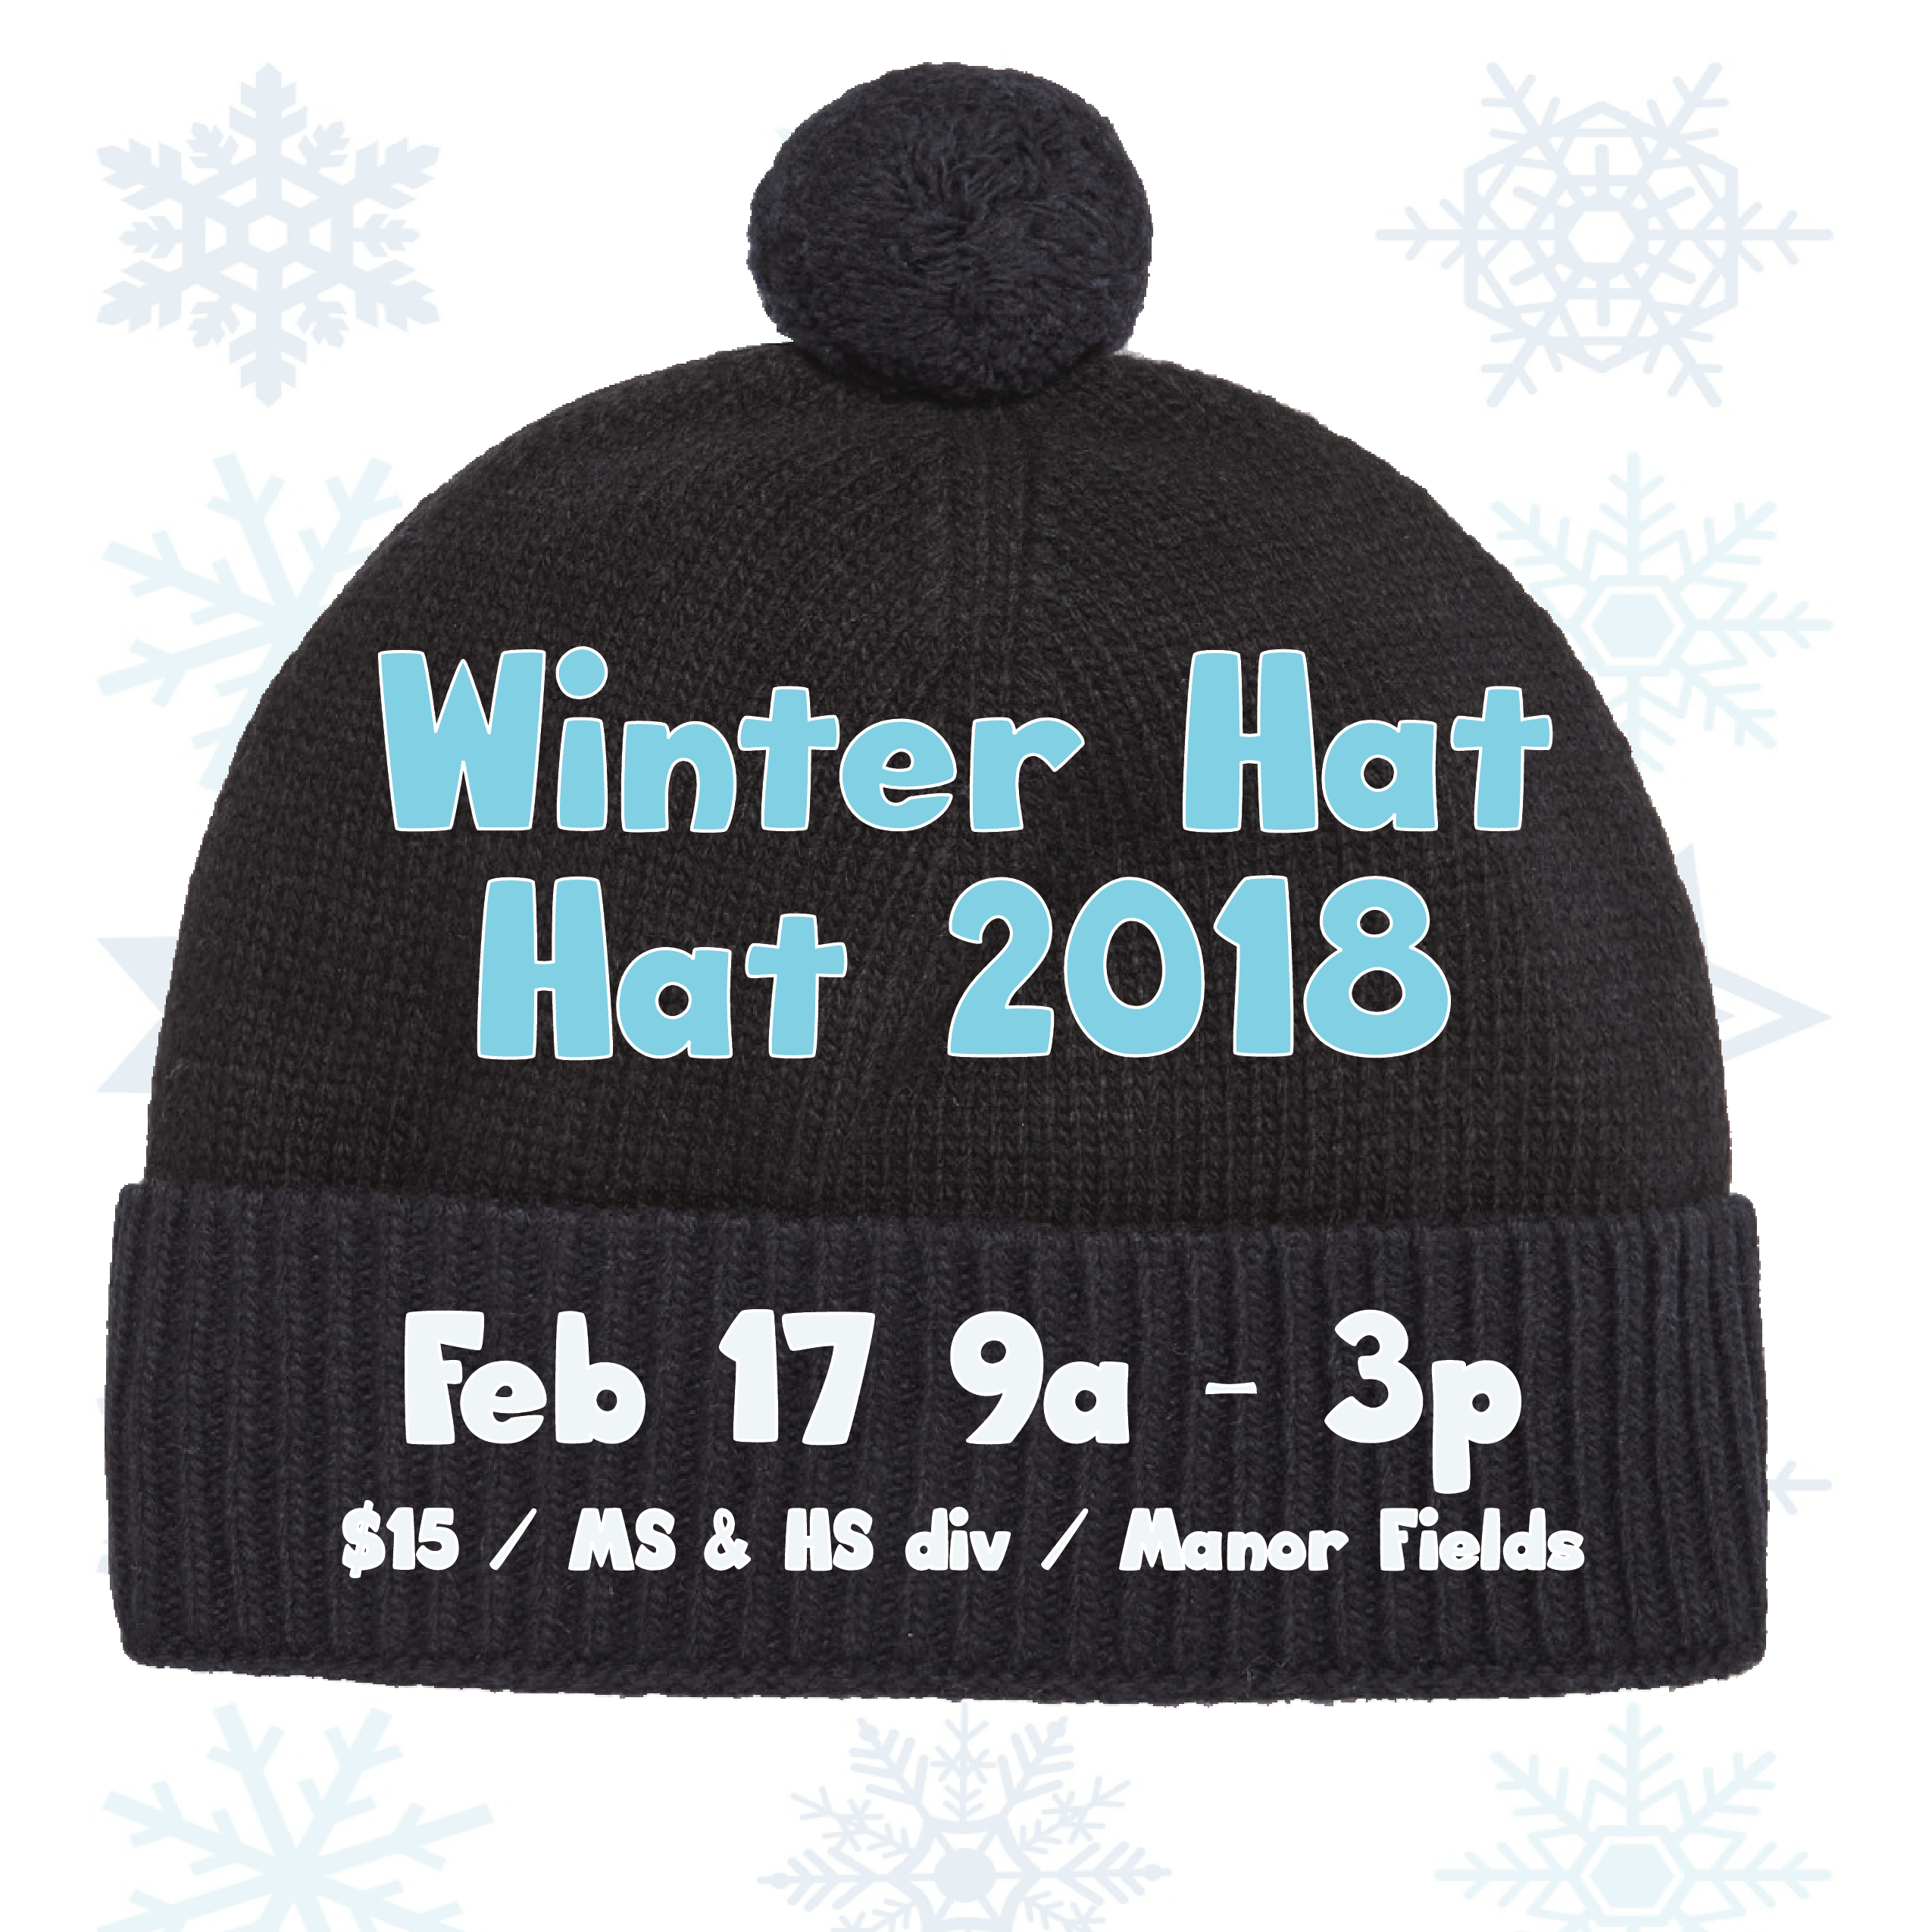 clothing clipart knitted hat